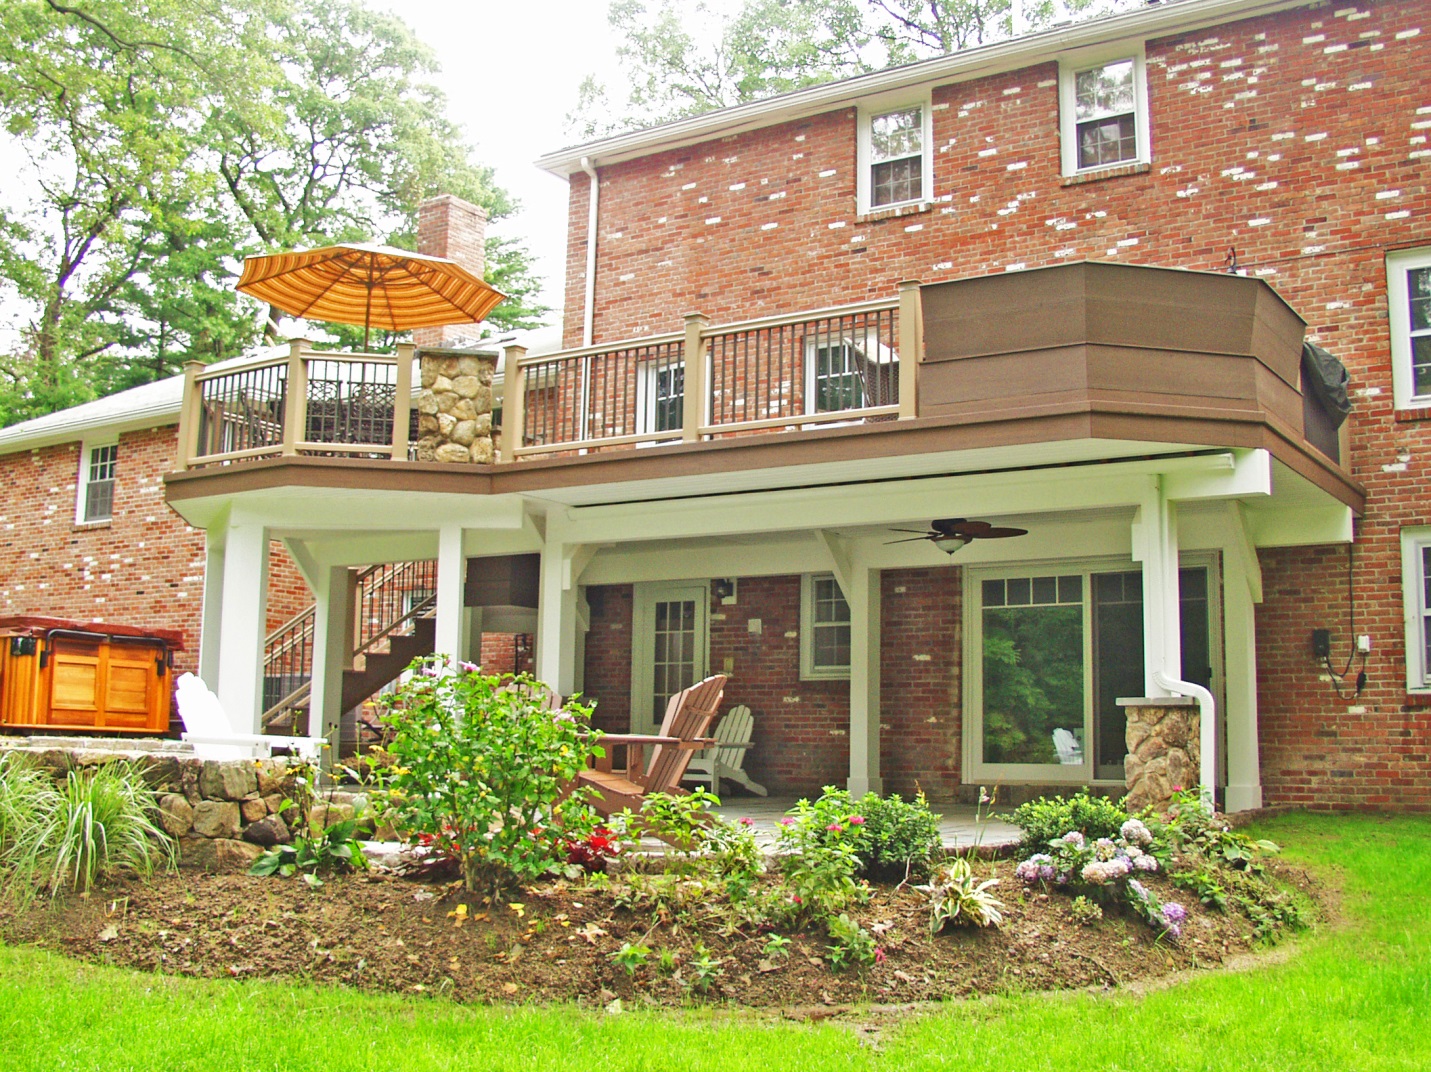 The epitome of multi-functional outdoor living spaces can now be found in Lynnfield, MA.